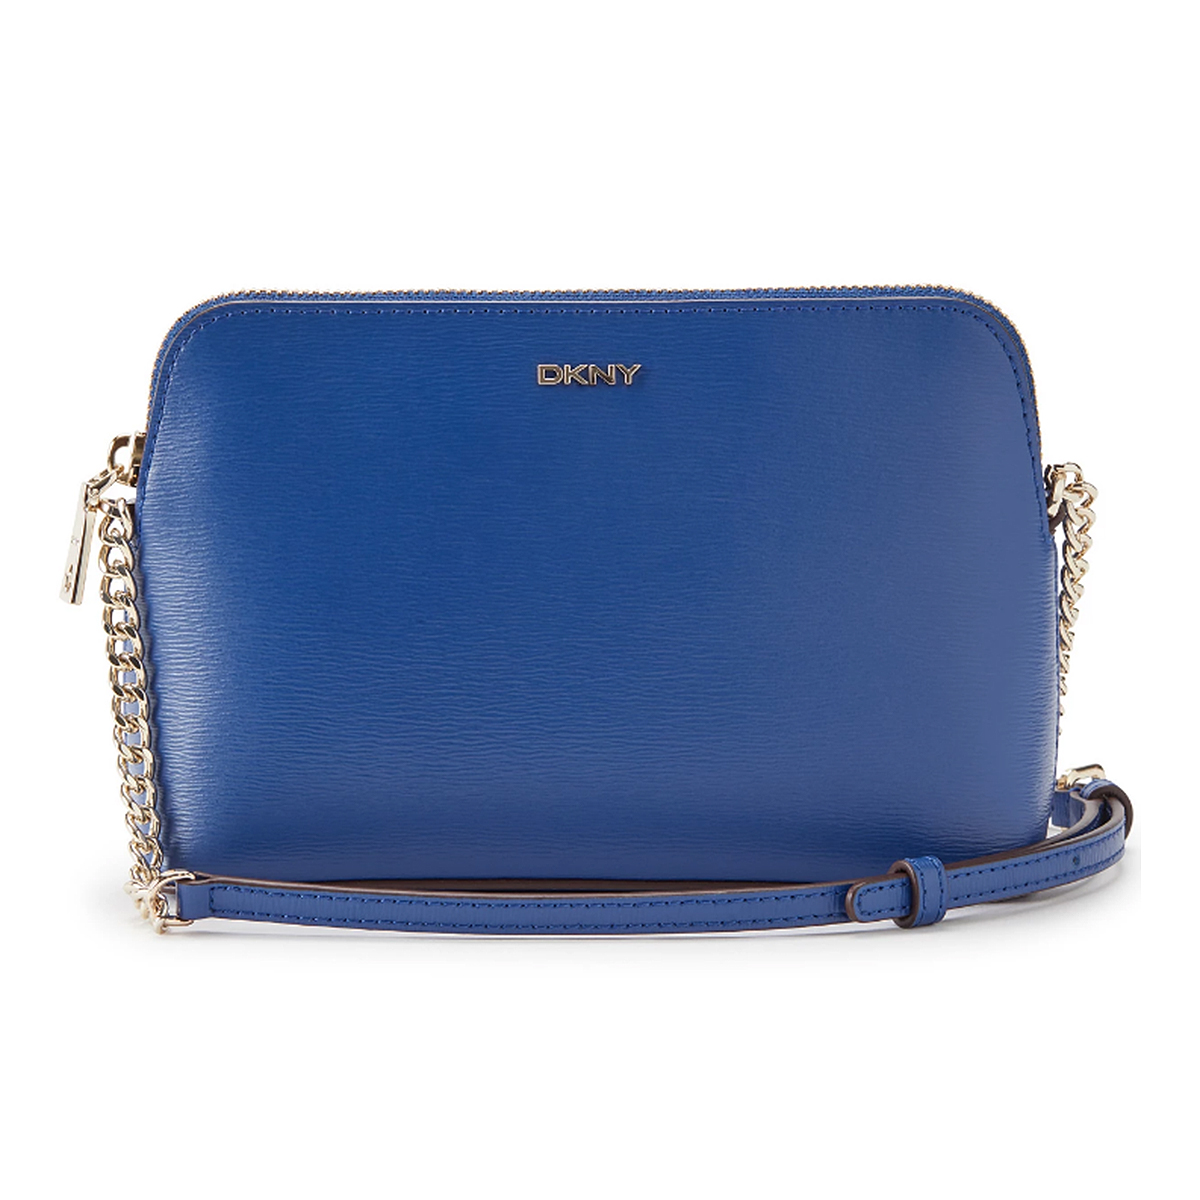 This Best-Selling Crossbody Purse Is Just $20 on